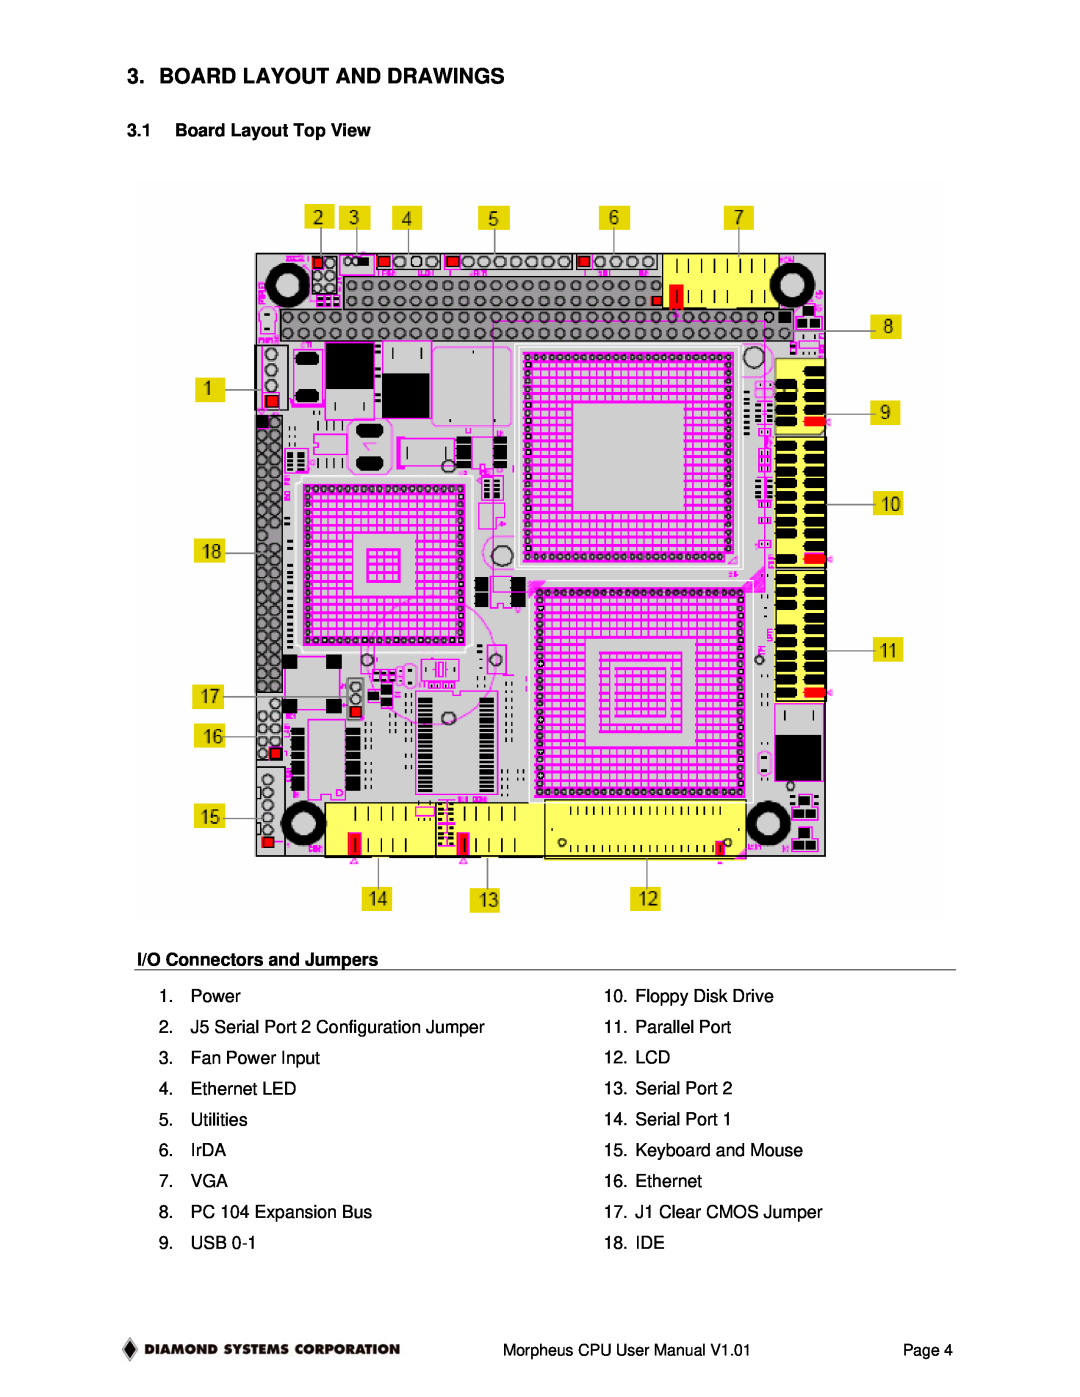 Diamond Systems 1.01 user manual Board Layout And Drawings, Board Layout Top View I/O Connectors and Jumpers 